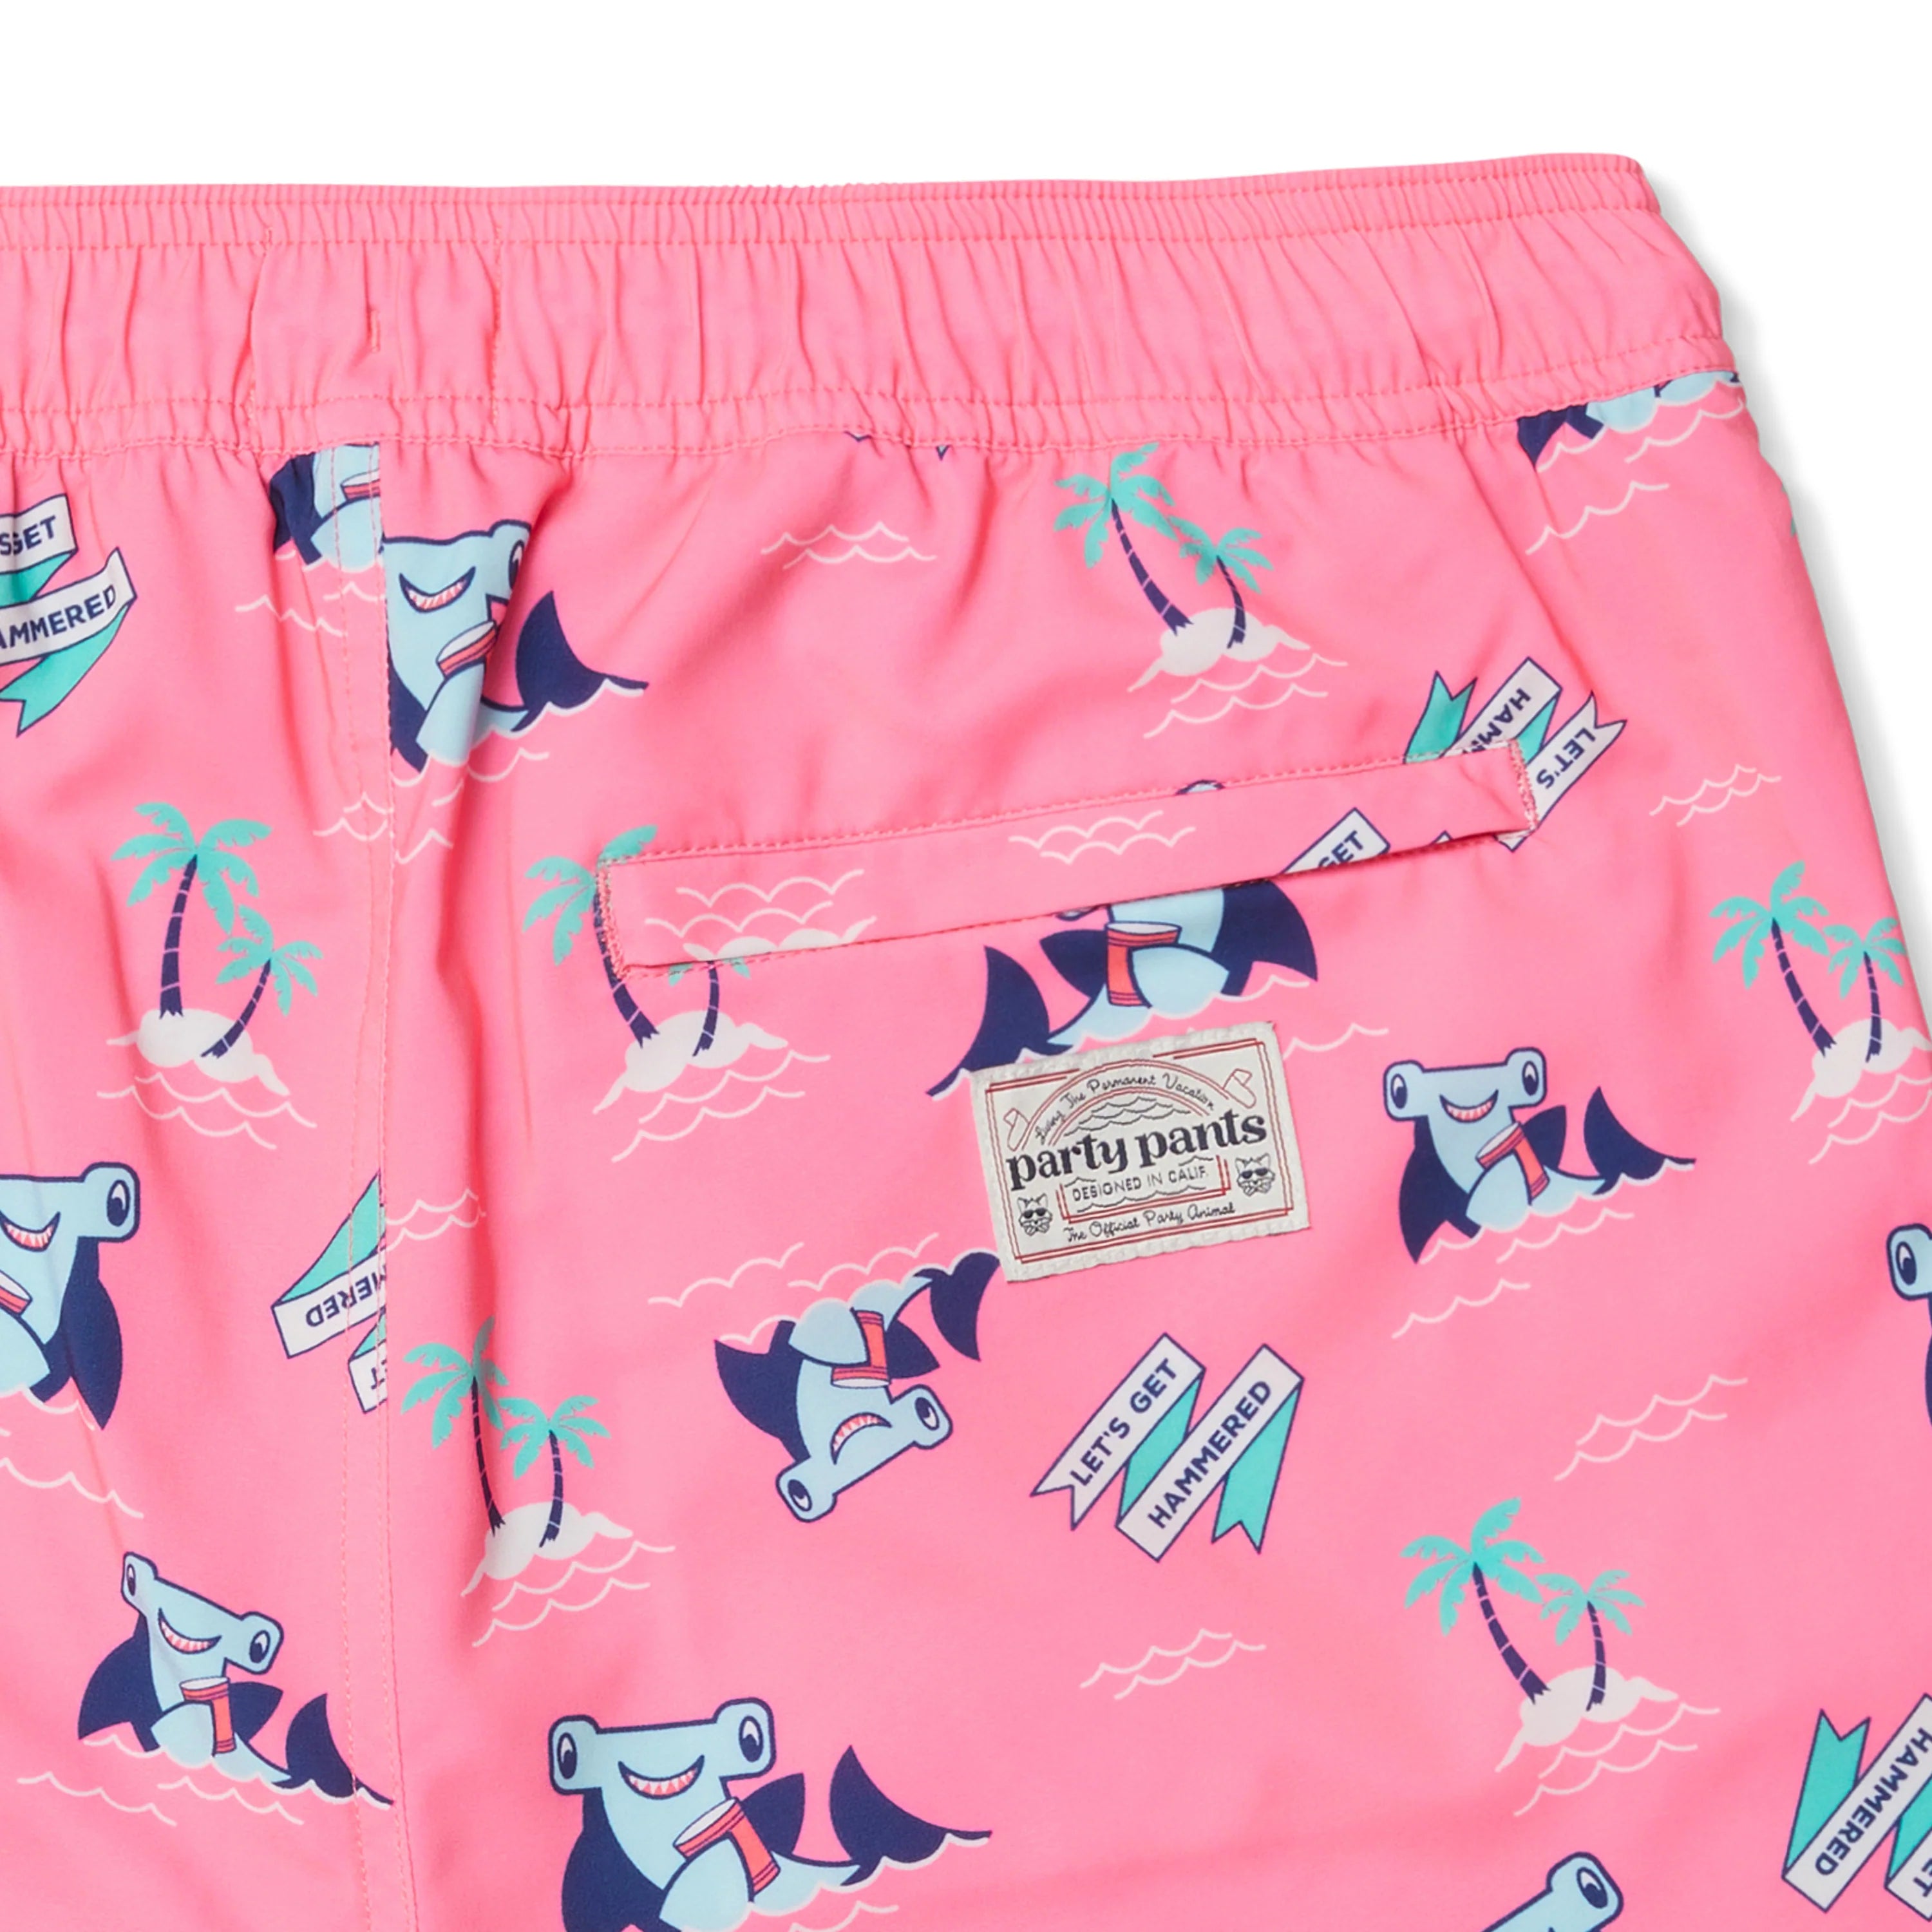 The Hammertime Sport Lined Party Short in pink